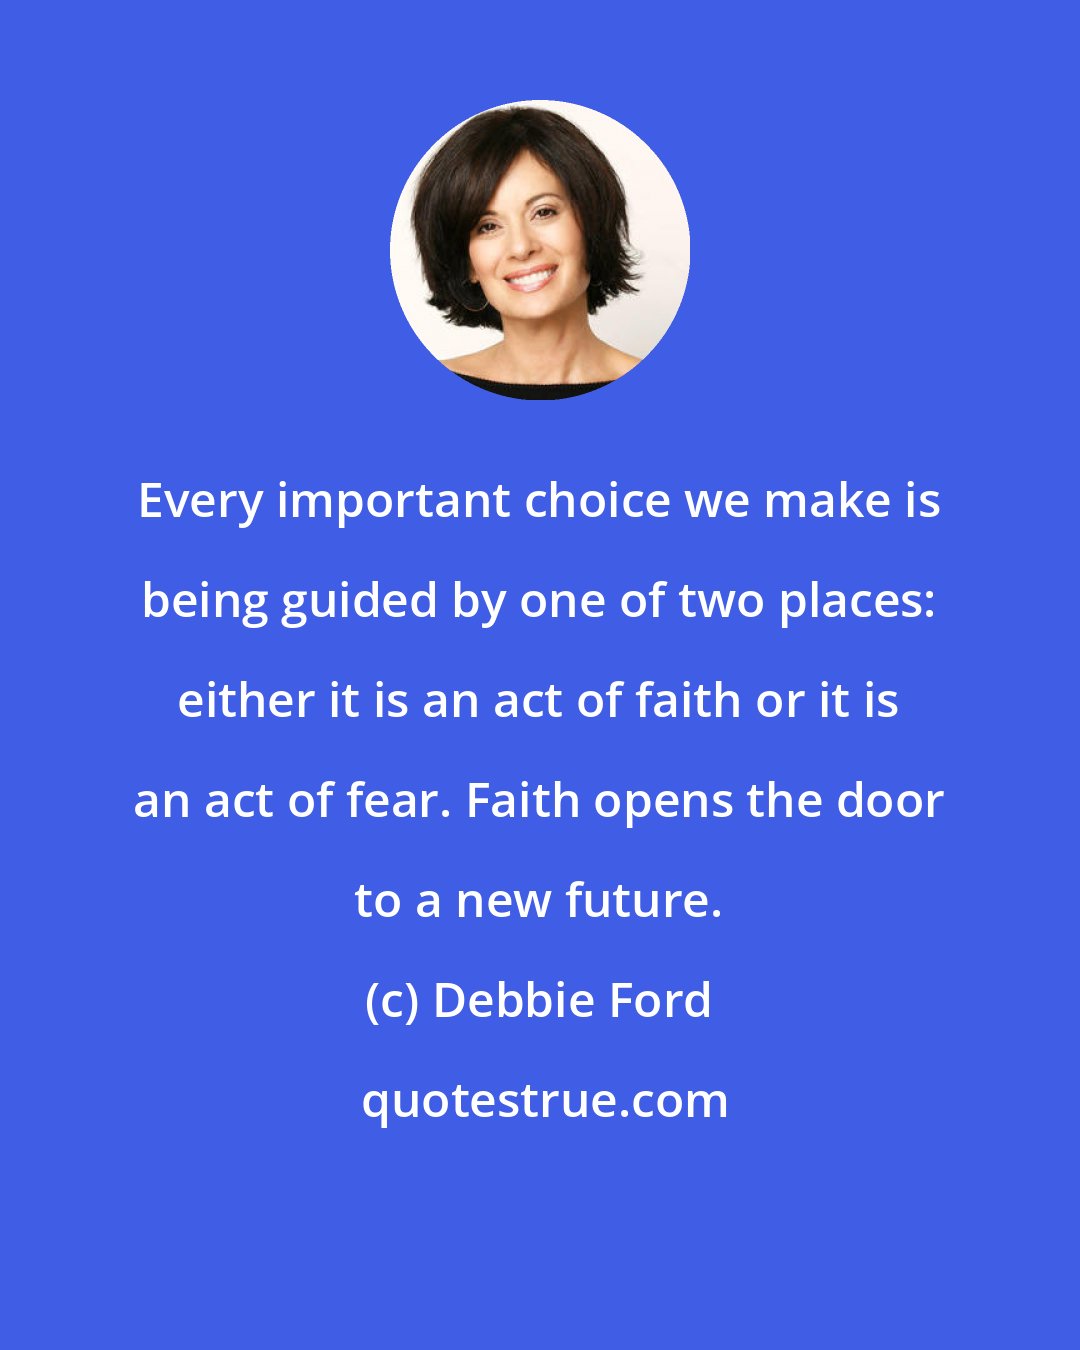 Debbie Ford: Every important choice we make is being guided by one of two places: either it is an act of faith or it is an act of fear. Faith opens the door to a new future.